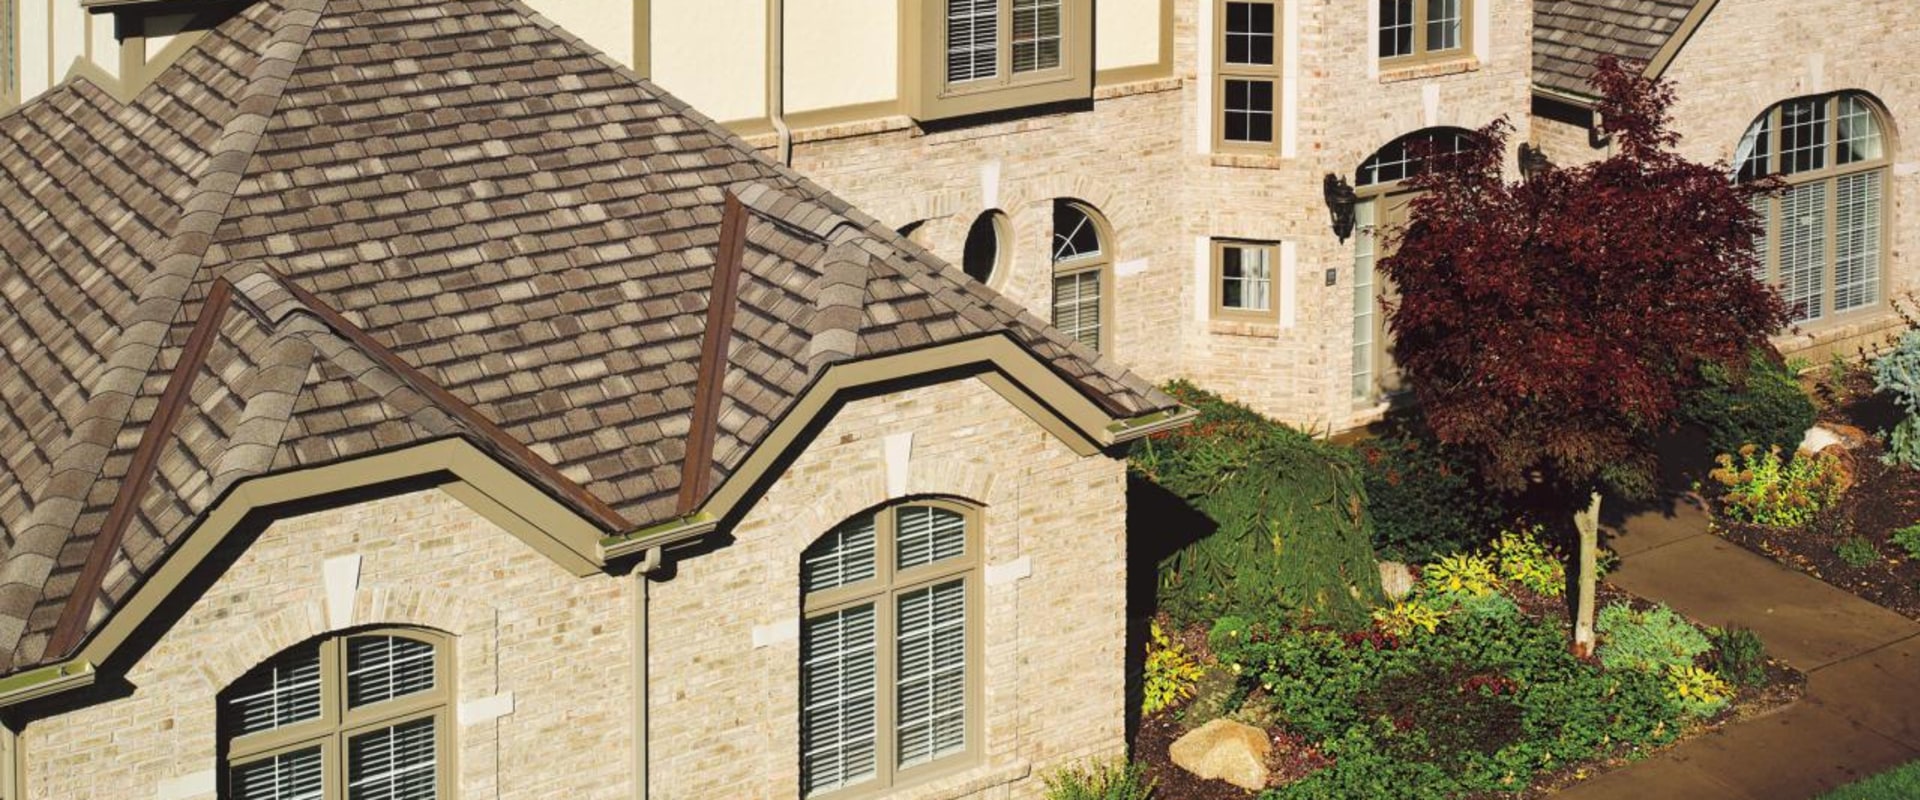 Which roofing is best?